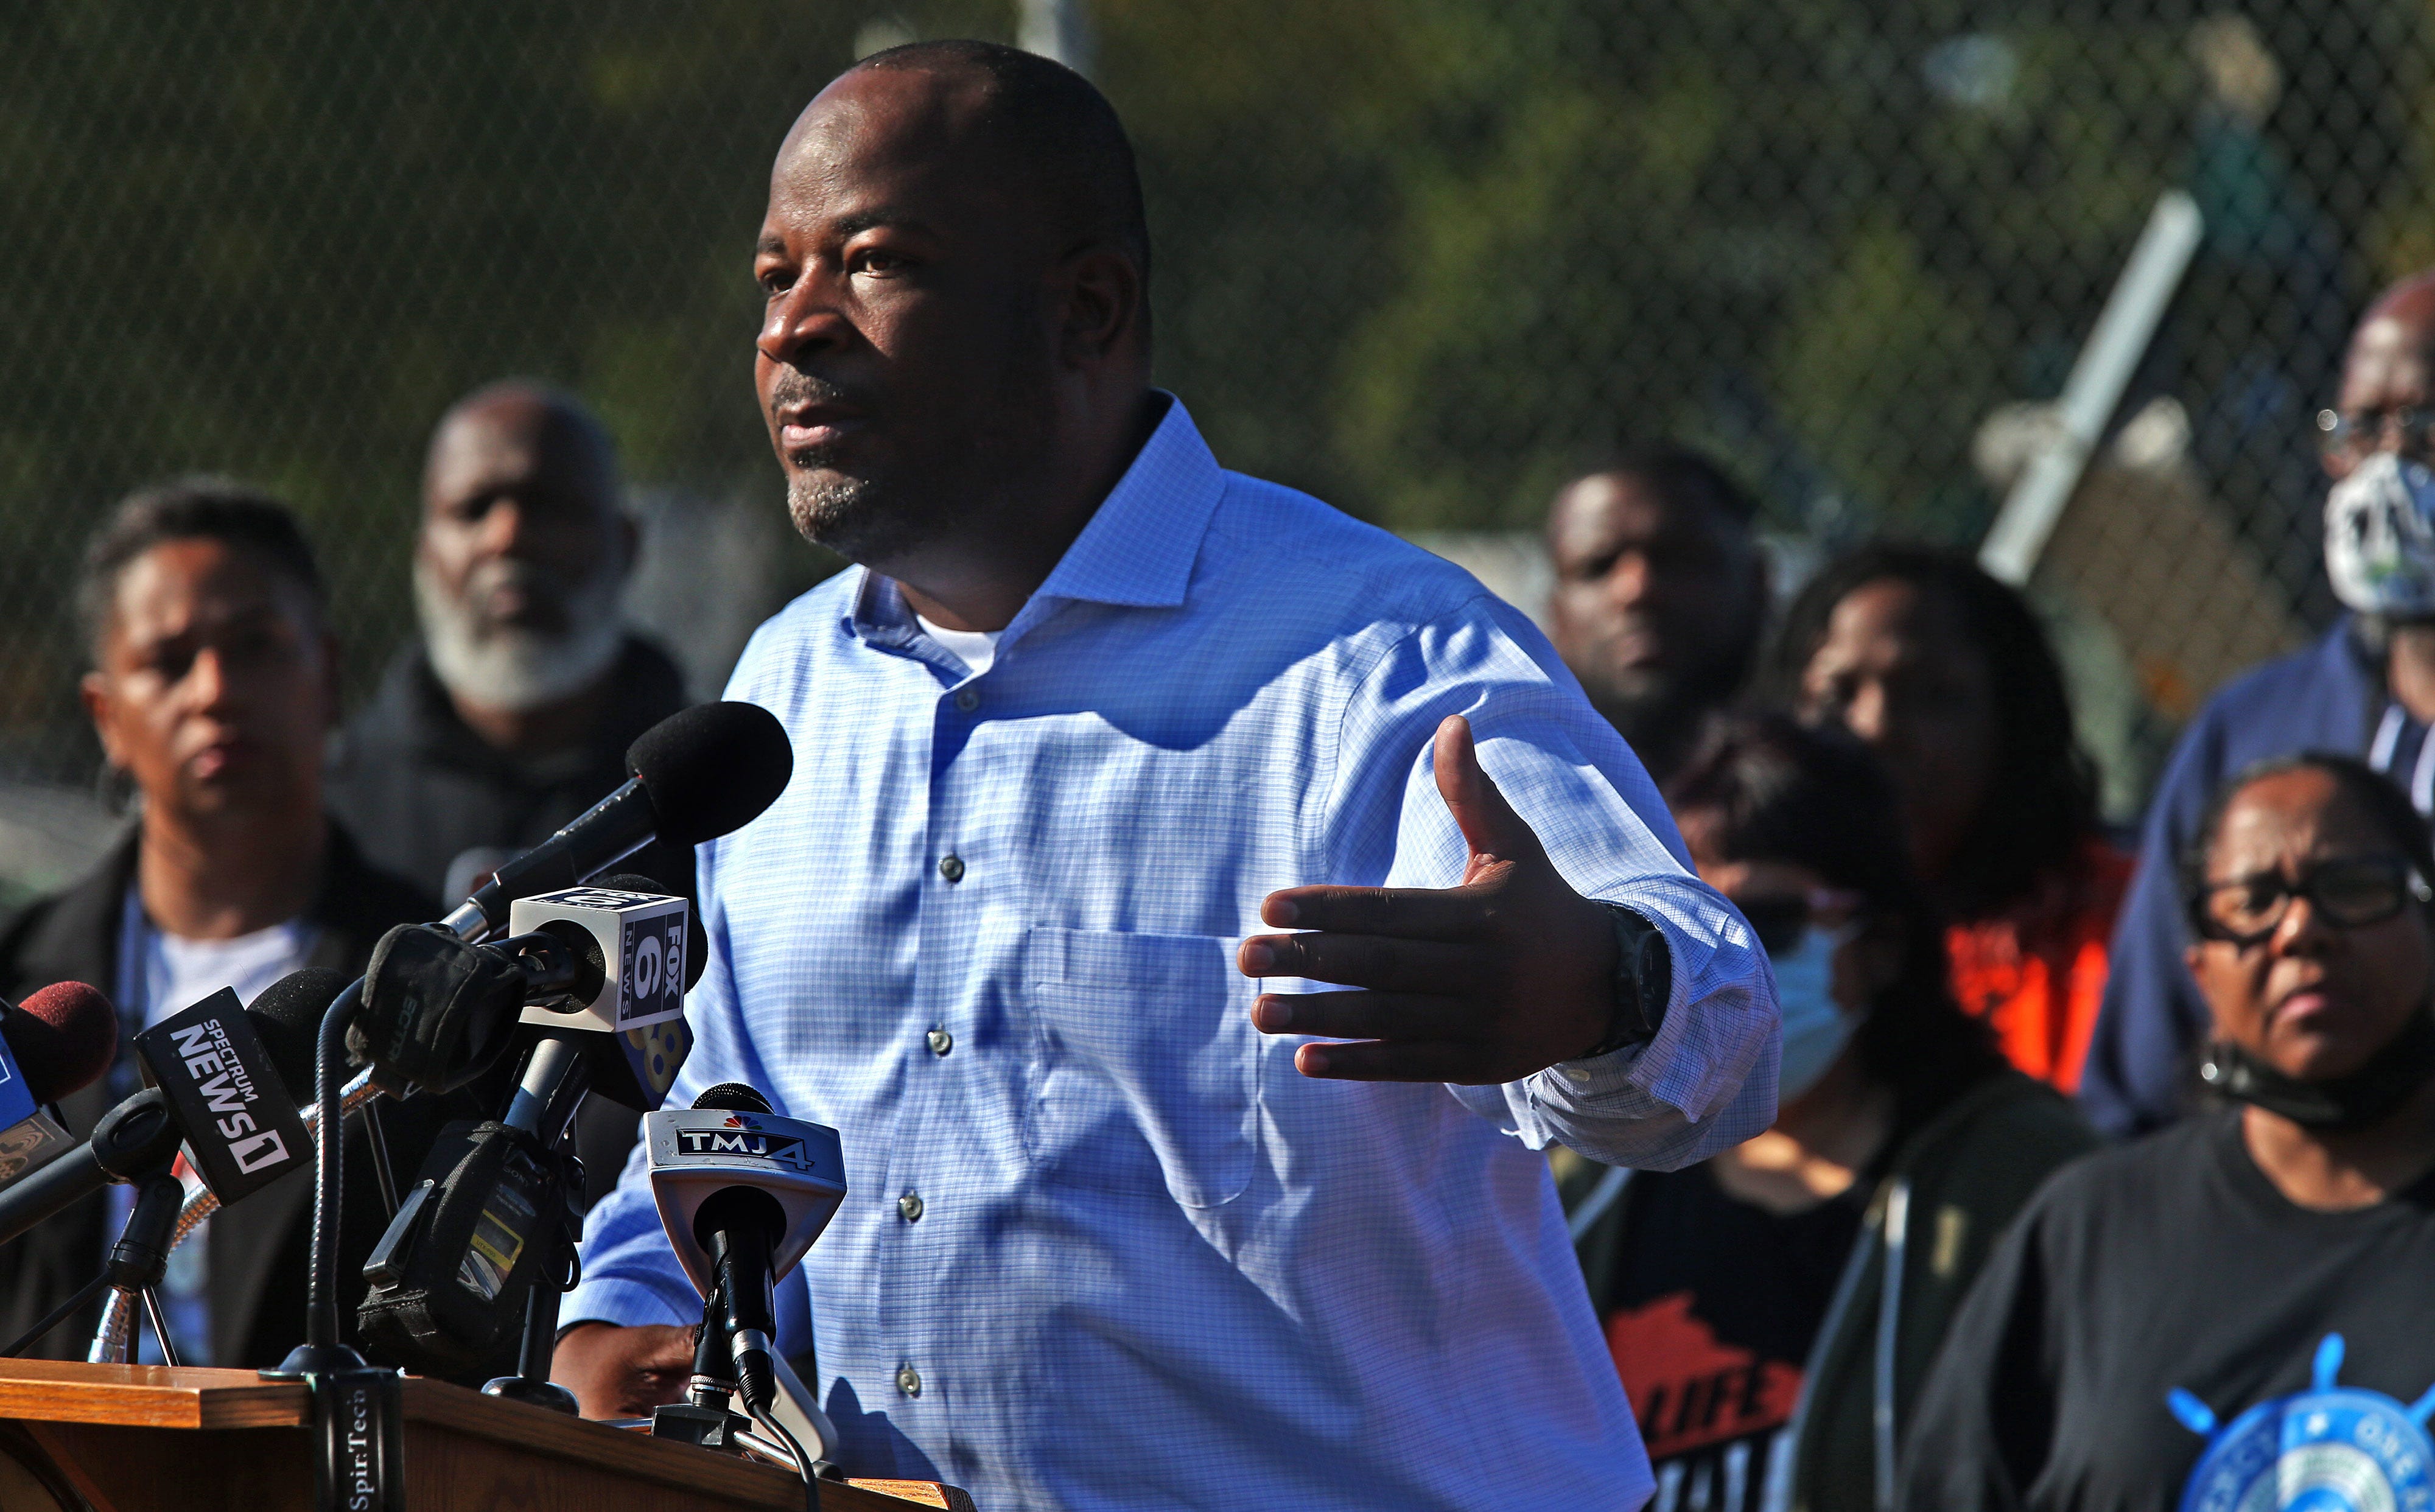 Reggie Moore, director of violence prevention policy and engagement at the Medical College of Wisconsin, speaks at a news conference in Sherman Park on Oct. 6, 2021. Moore and his wife, Sharlen, started the Urban Underground in 2000.